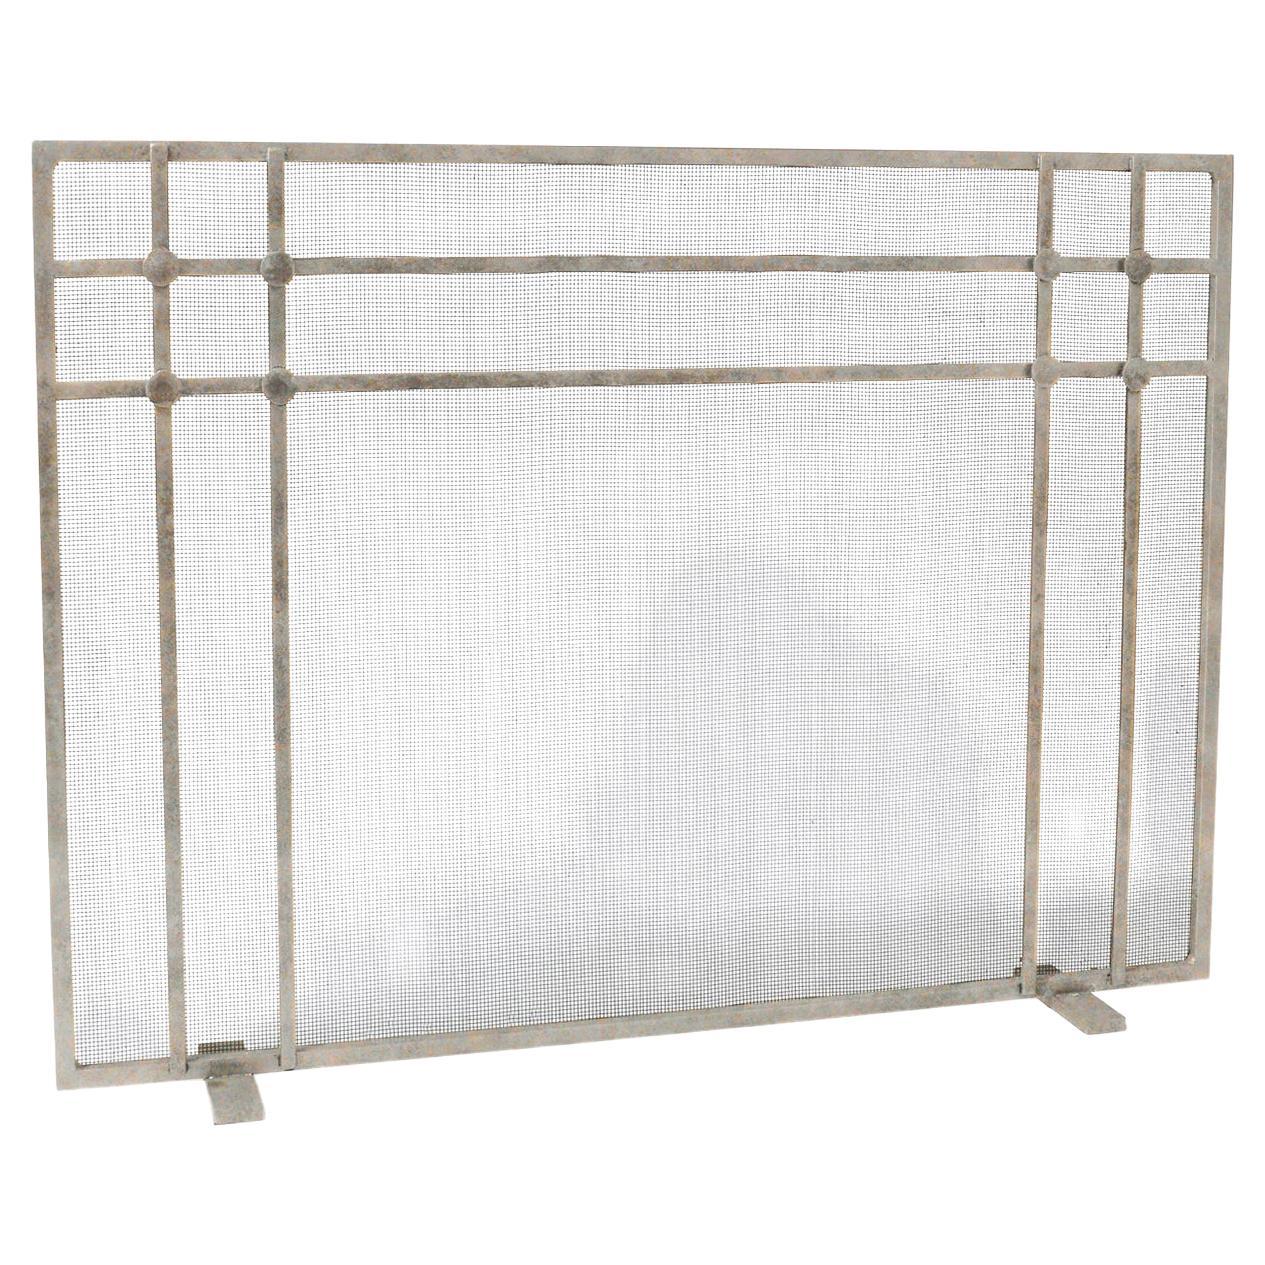 Henry Fireplace Screen in Aged Silver